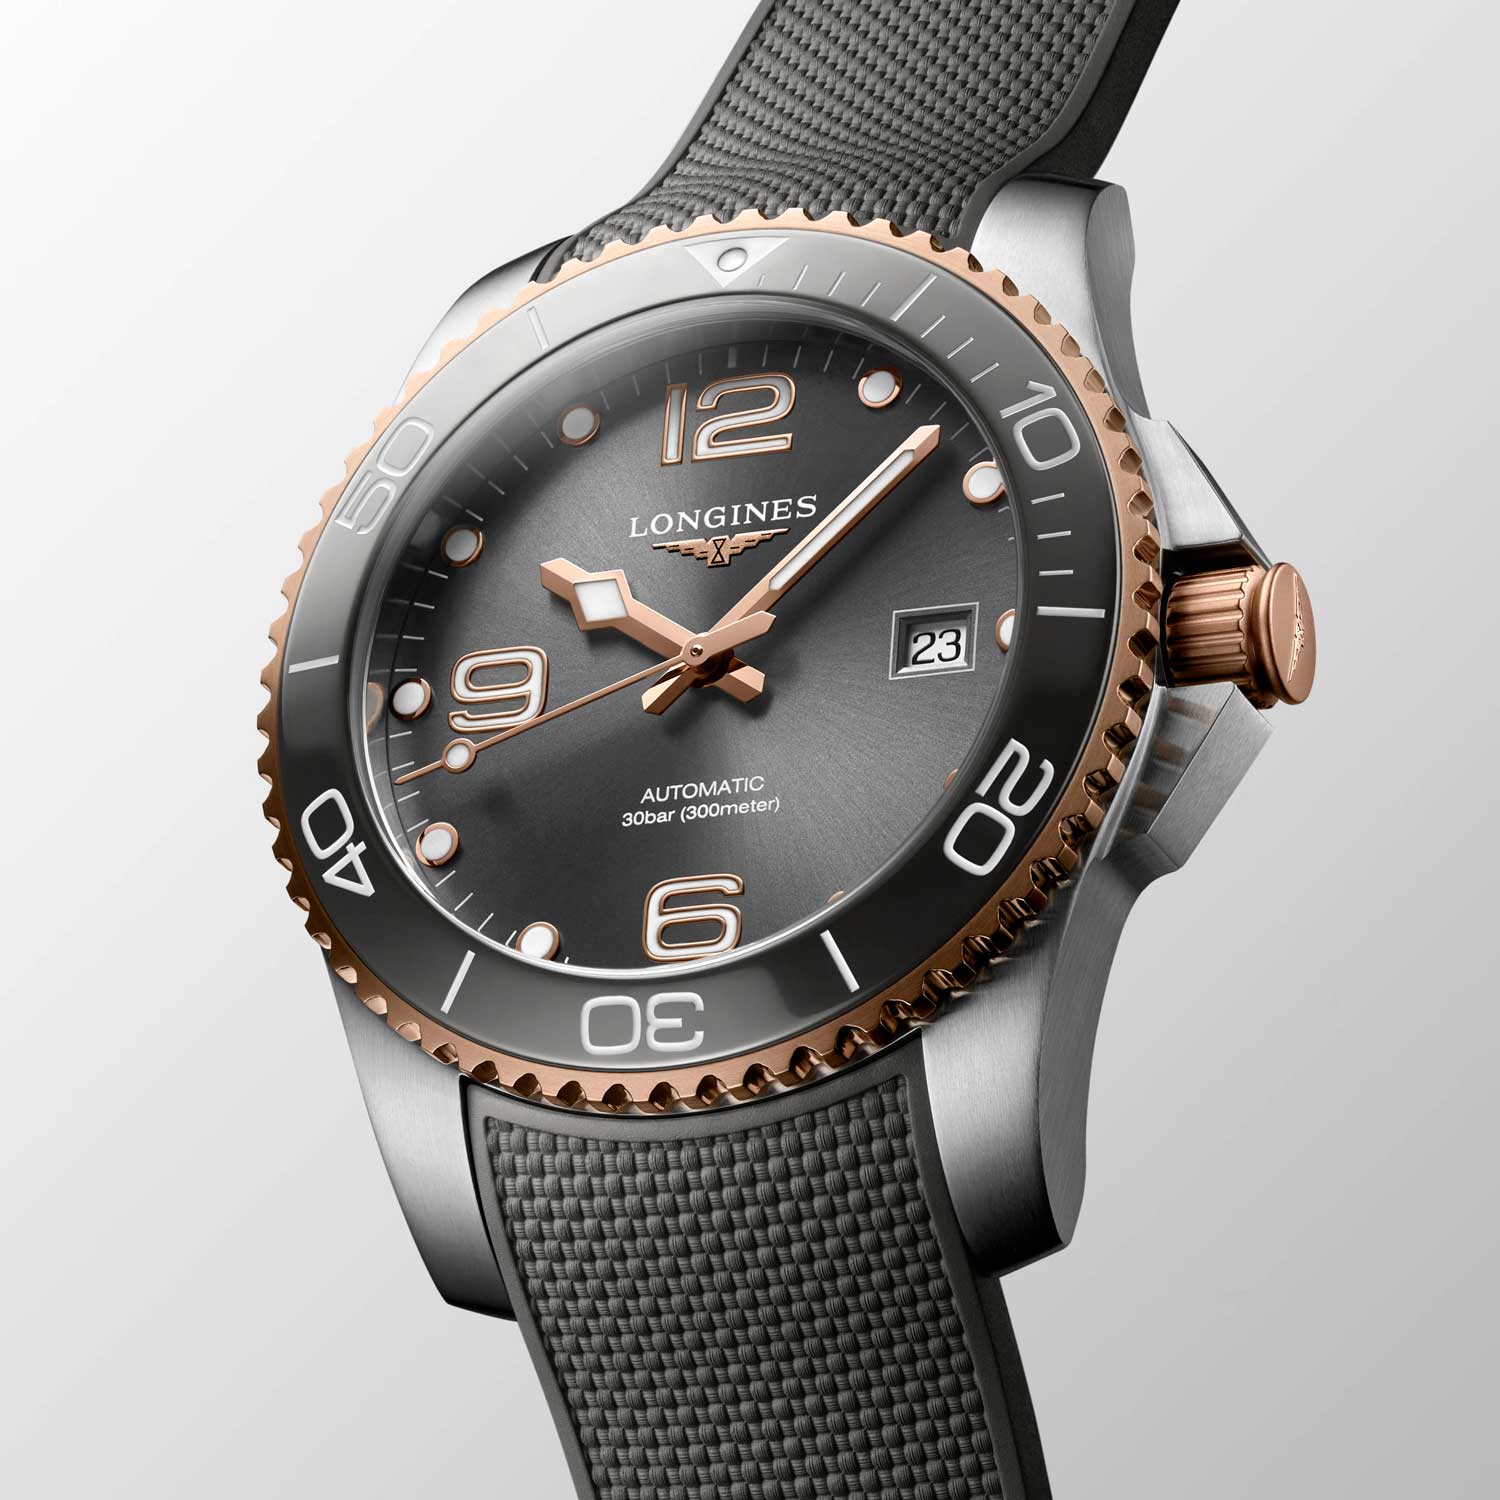 The new variations give this diver watch a welcome air of technical luxury.